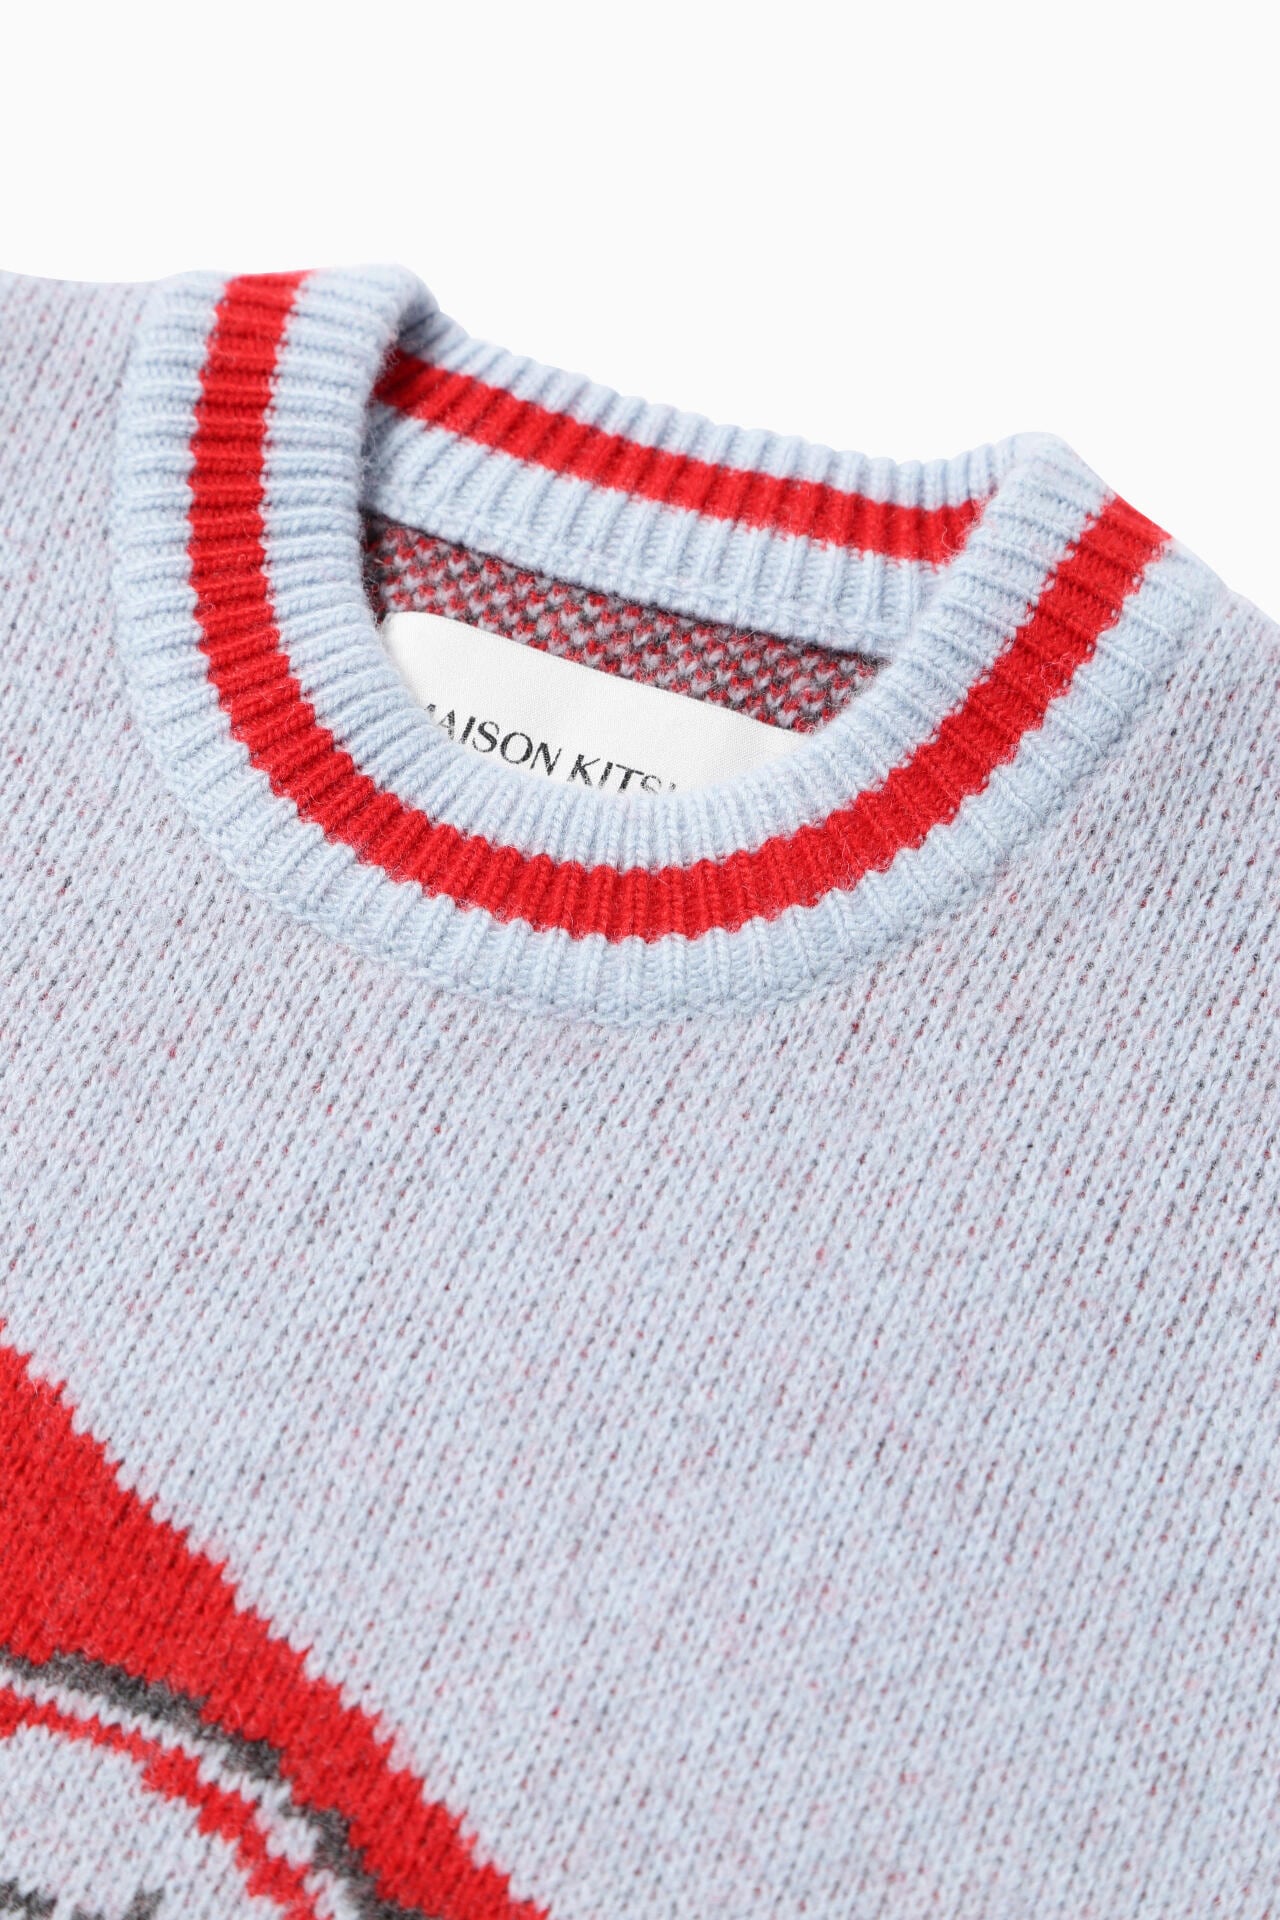 MAISON KITSUNÉ × and wander knit pullover | cut_knit | and wander 